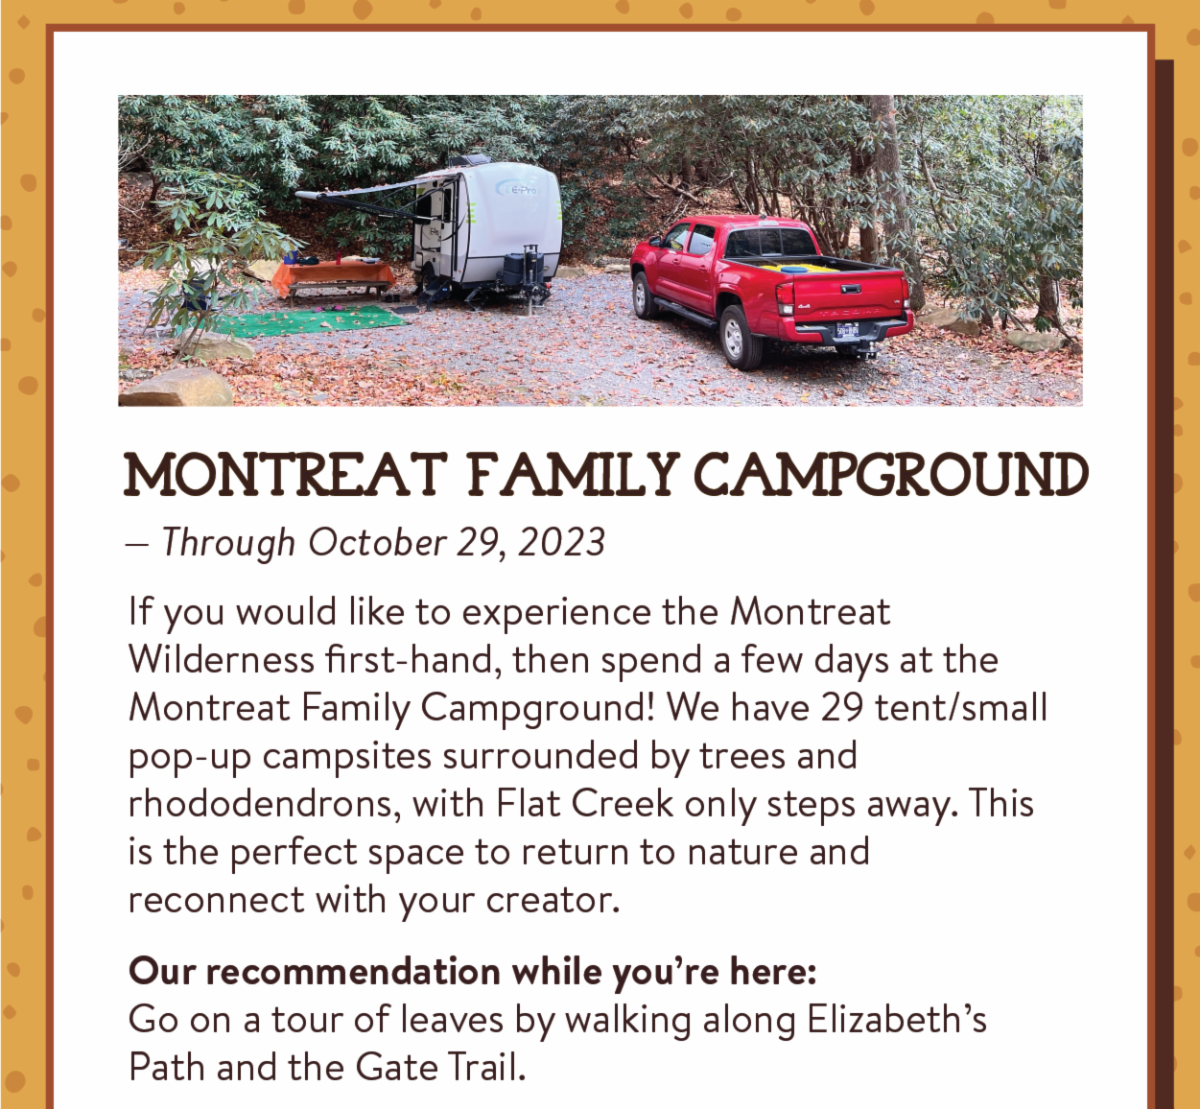 Montreat Family Campground - If you would like to experience the Montreat Wilderness first-hand, then spend a few days at the Montreat Family Campground! We have 29 tent/small pop-up campsites surrounded by trees and rhododendrons, with Flat Creek only steps away. This is the perfect space to return to nature and reconnect with your creator. Our recommendation while you’re here:Go on a tour of leaves by walking along Elizabeth’s Path and the Gate Trail.